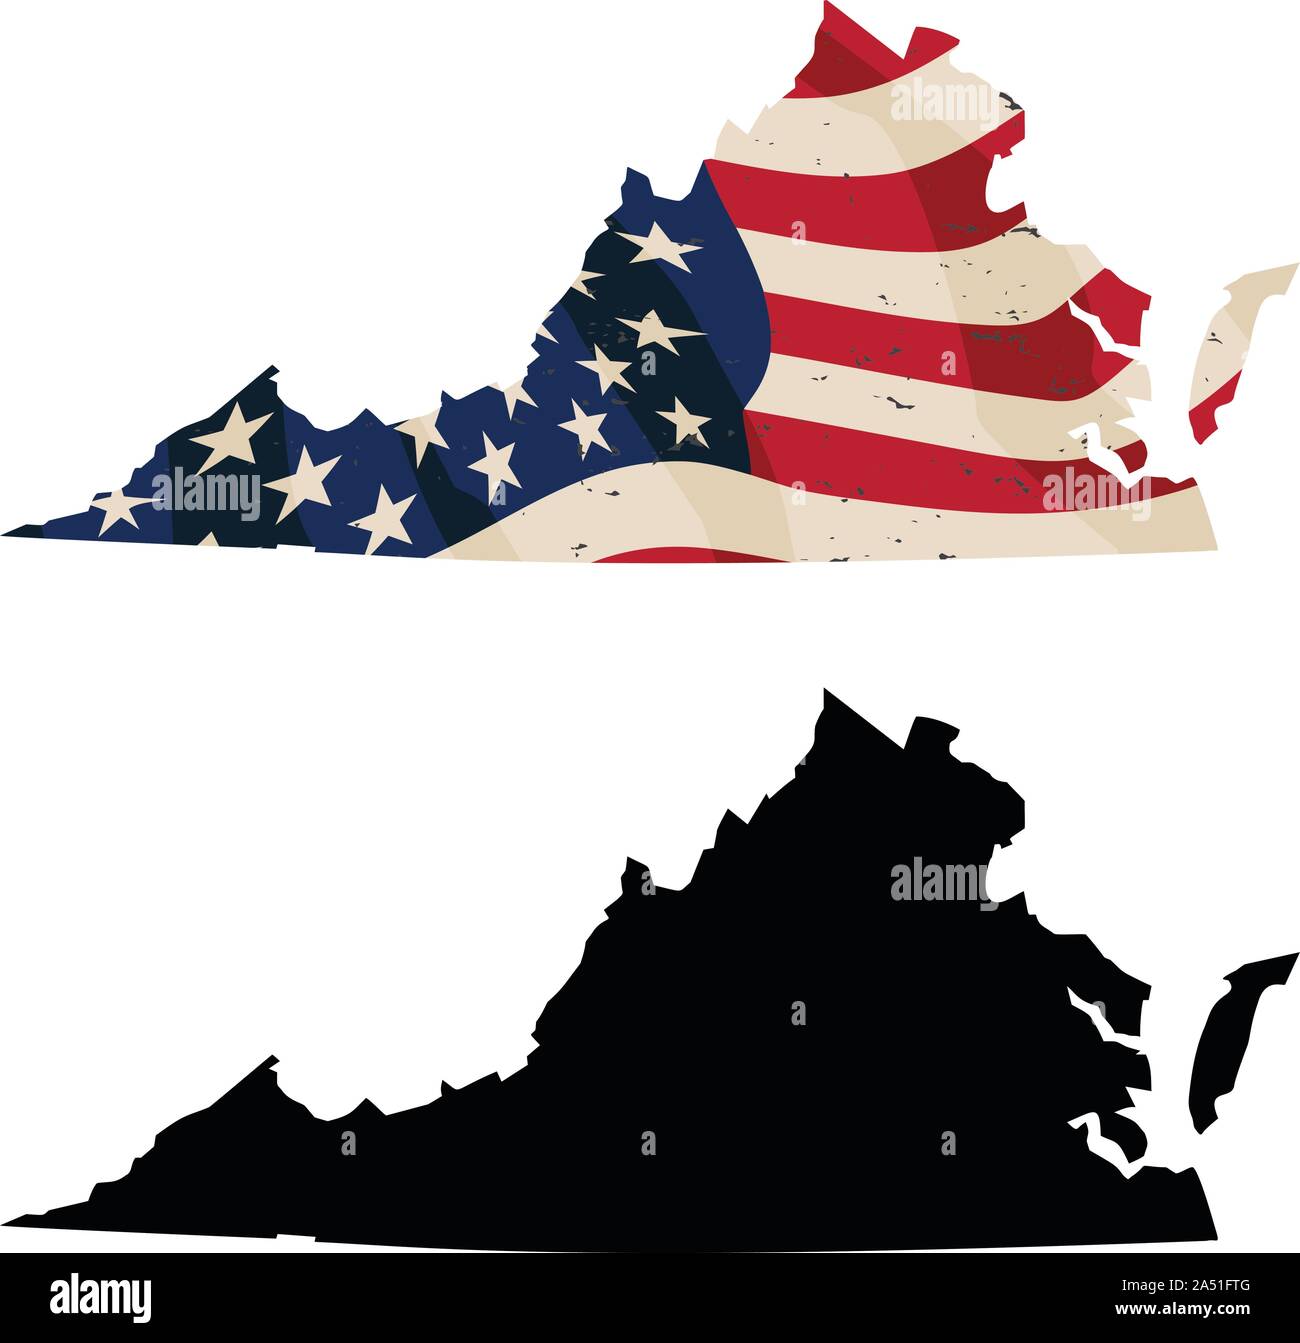 Virginia with aged USA flag embedded and black silhouette isolated vector illustration Stock Vector